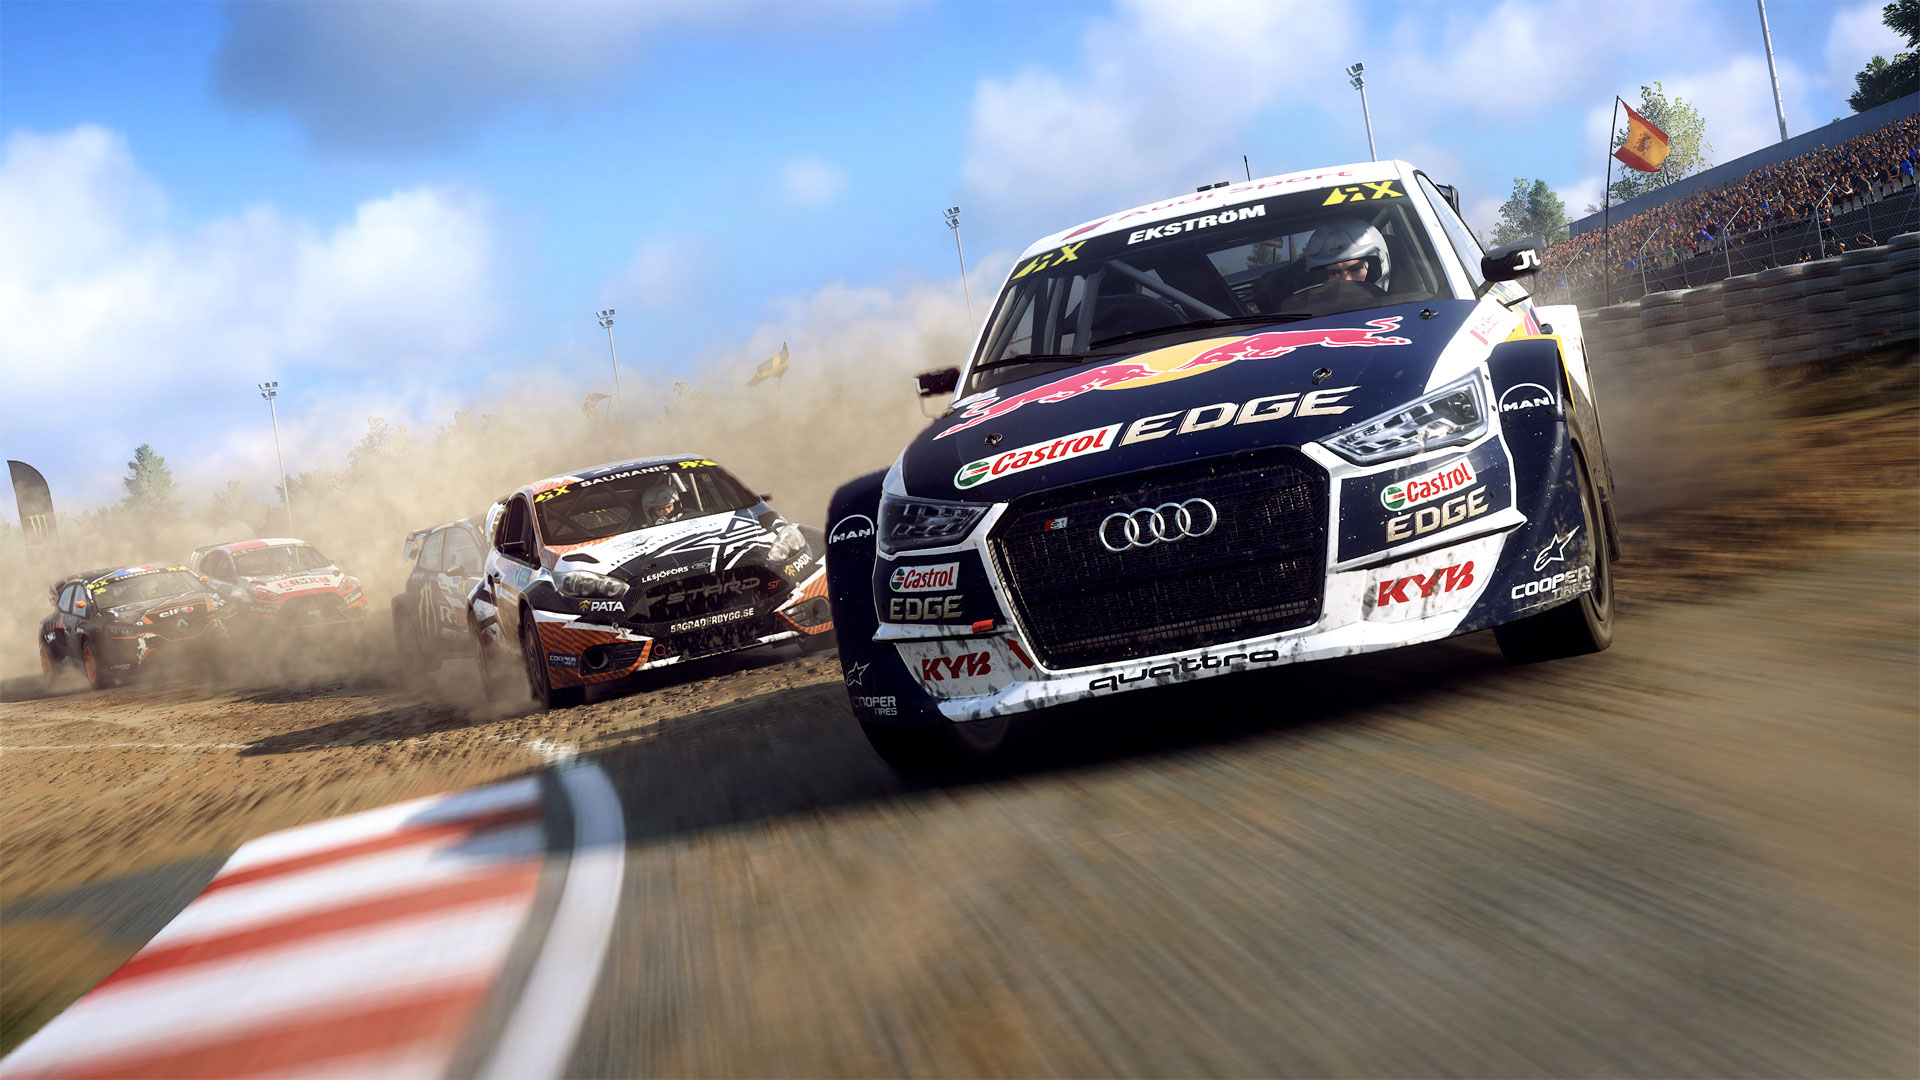 android dirt rally image